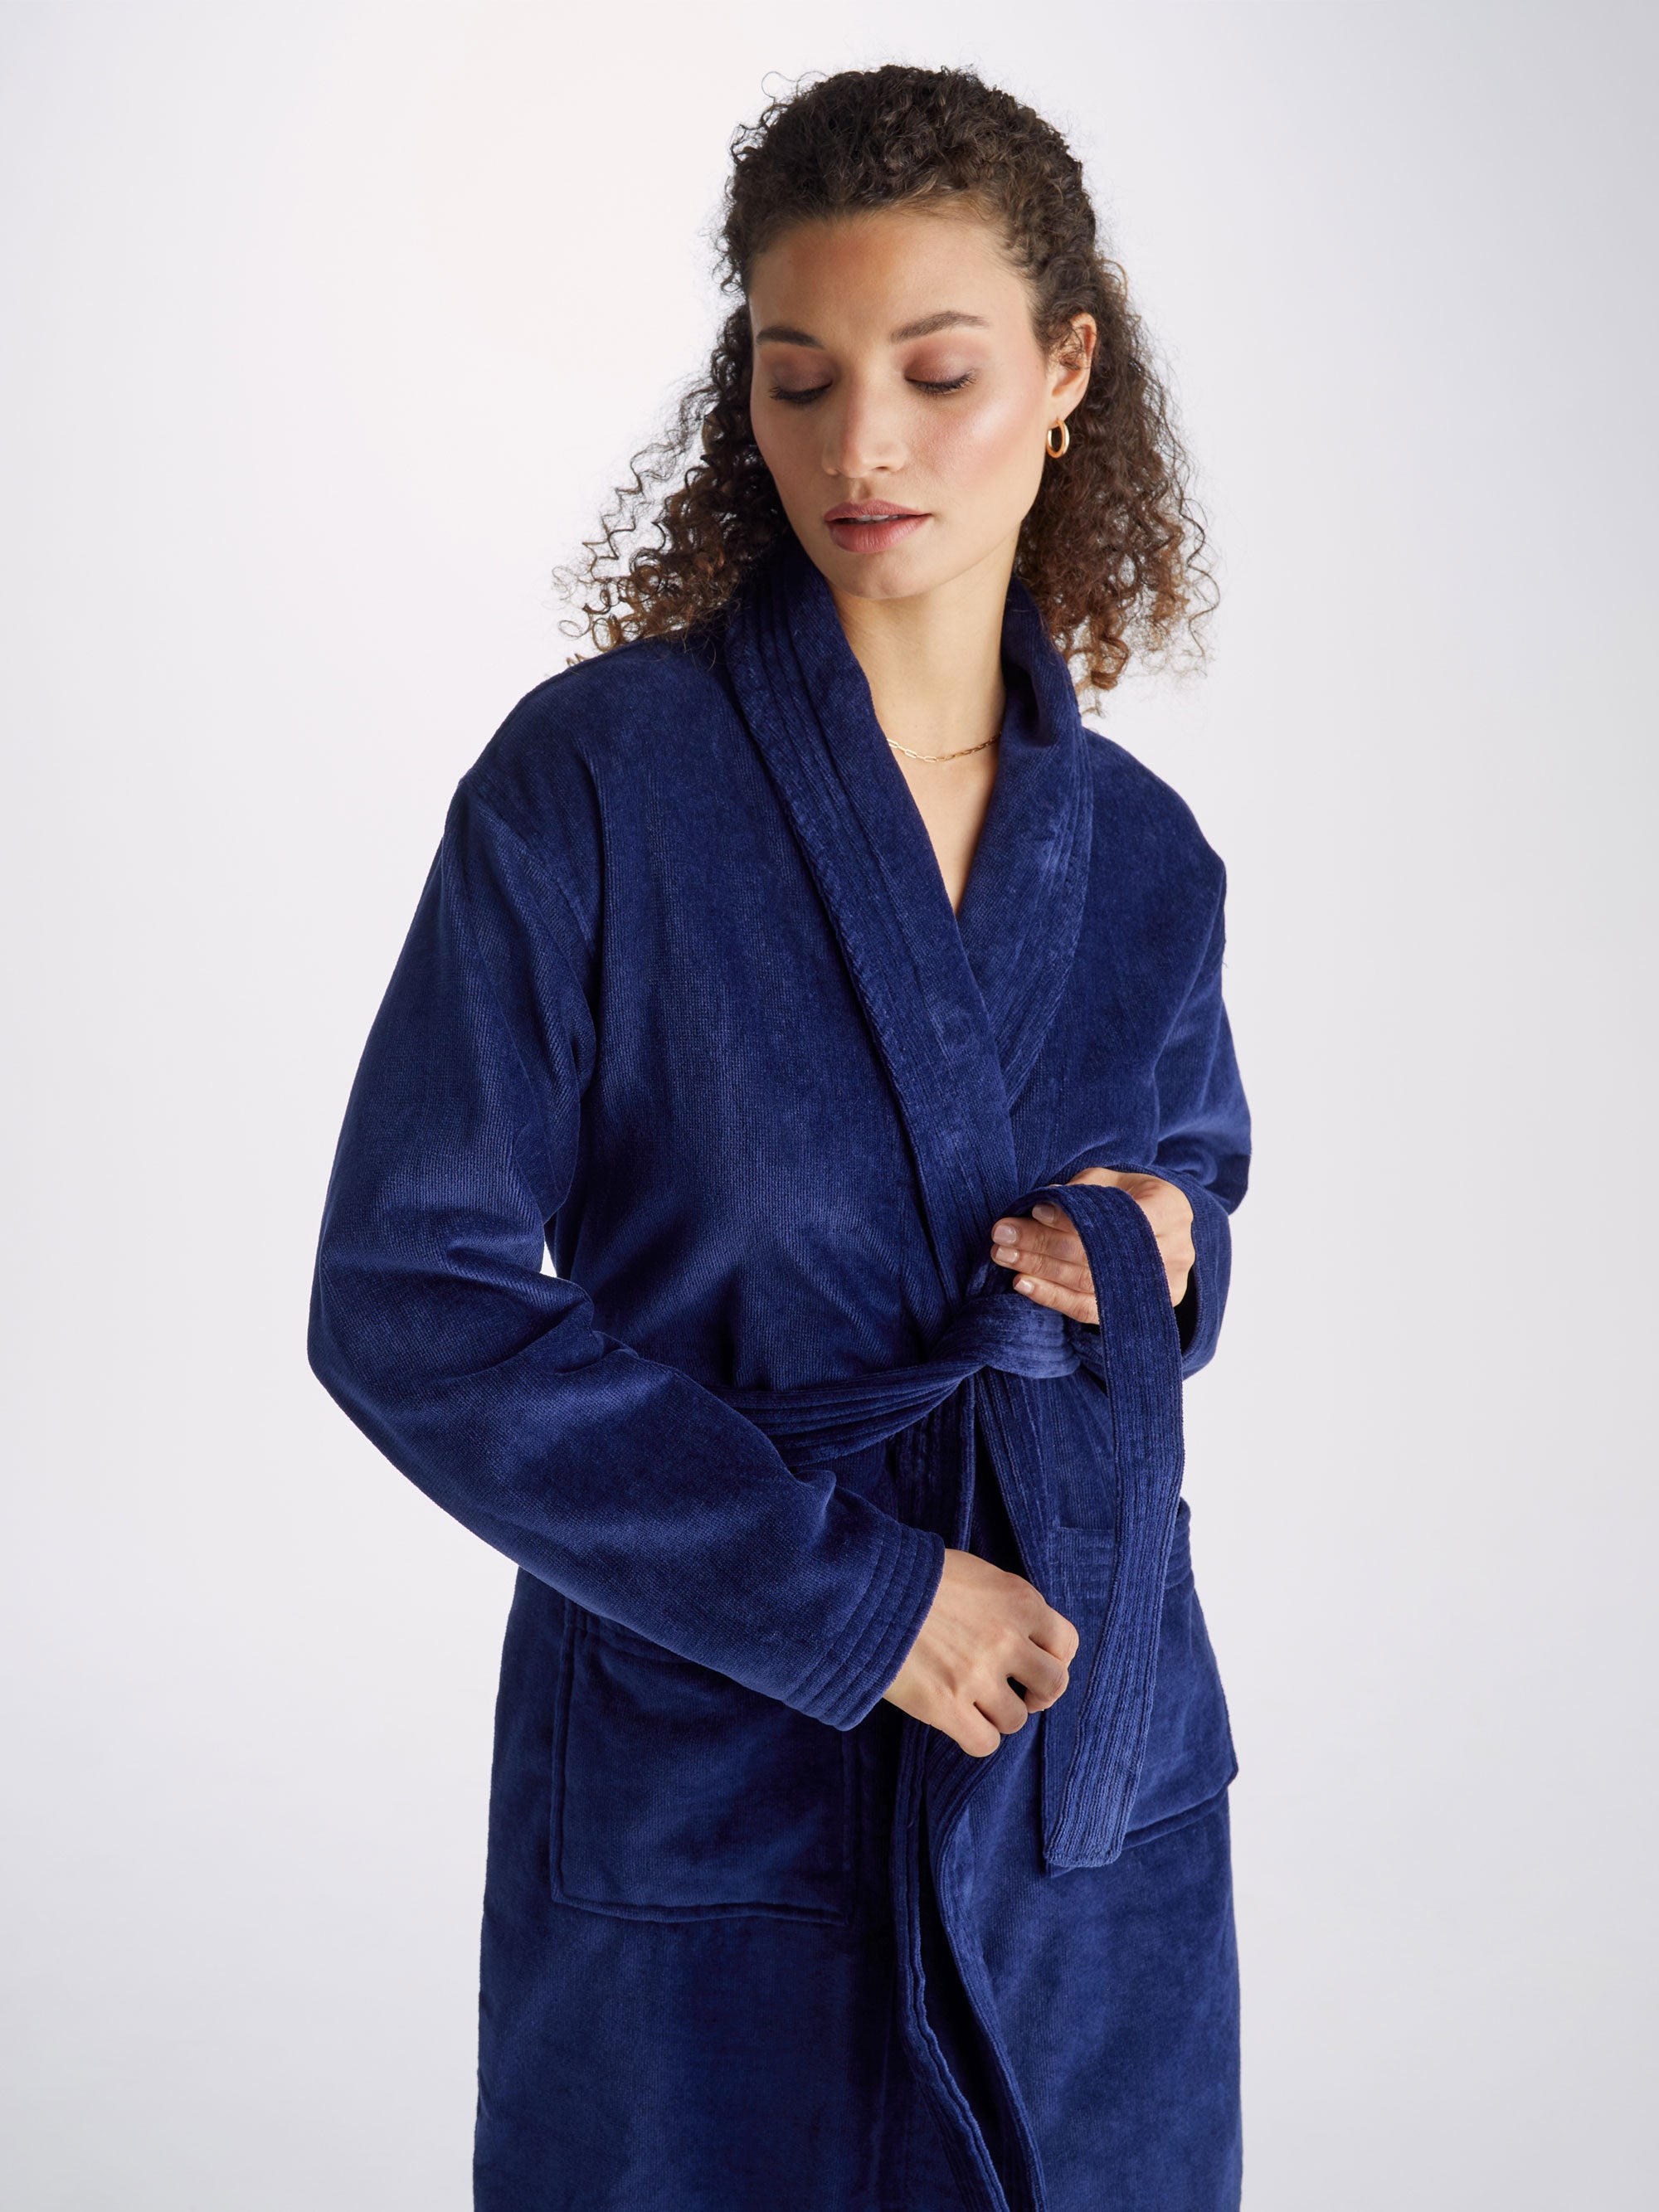 9 Gorgeous Bathrobes & Dressing Gowns For Women Of Style